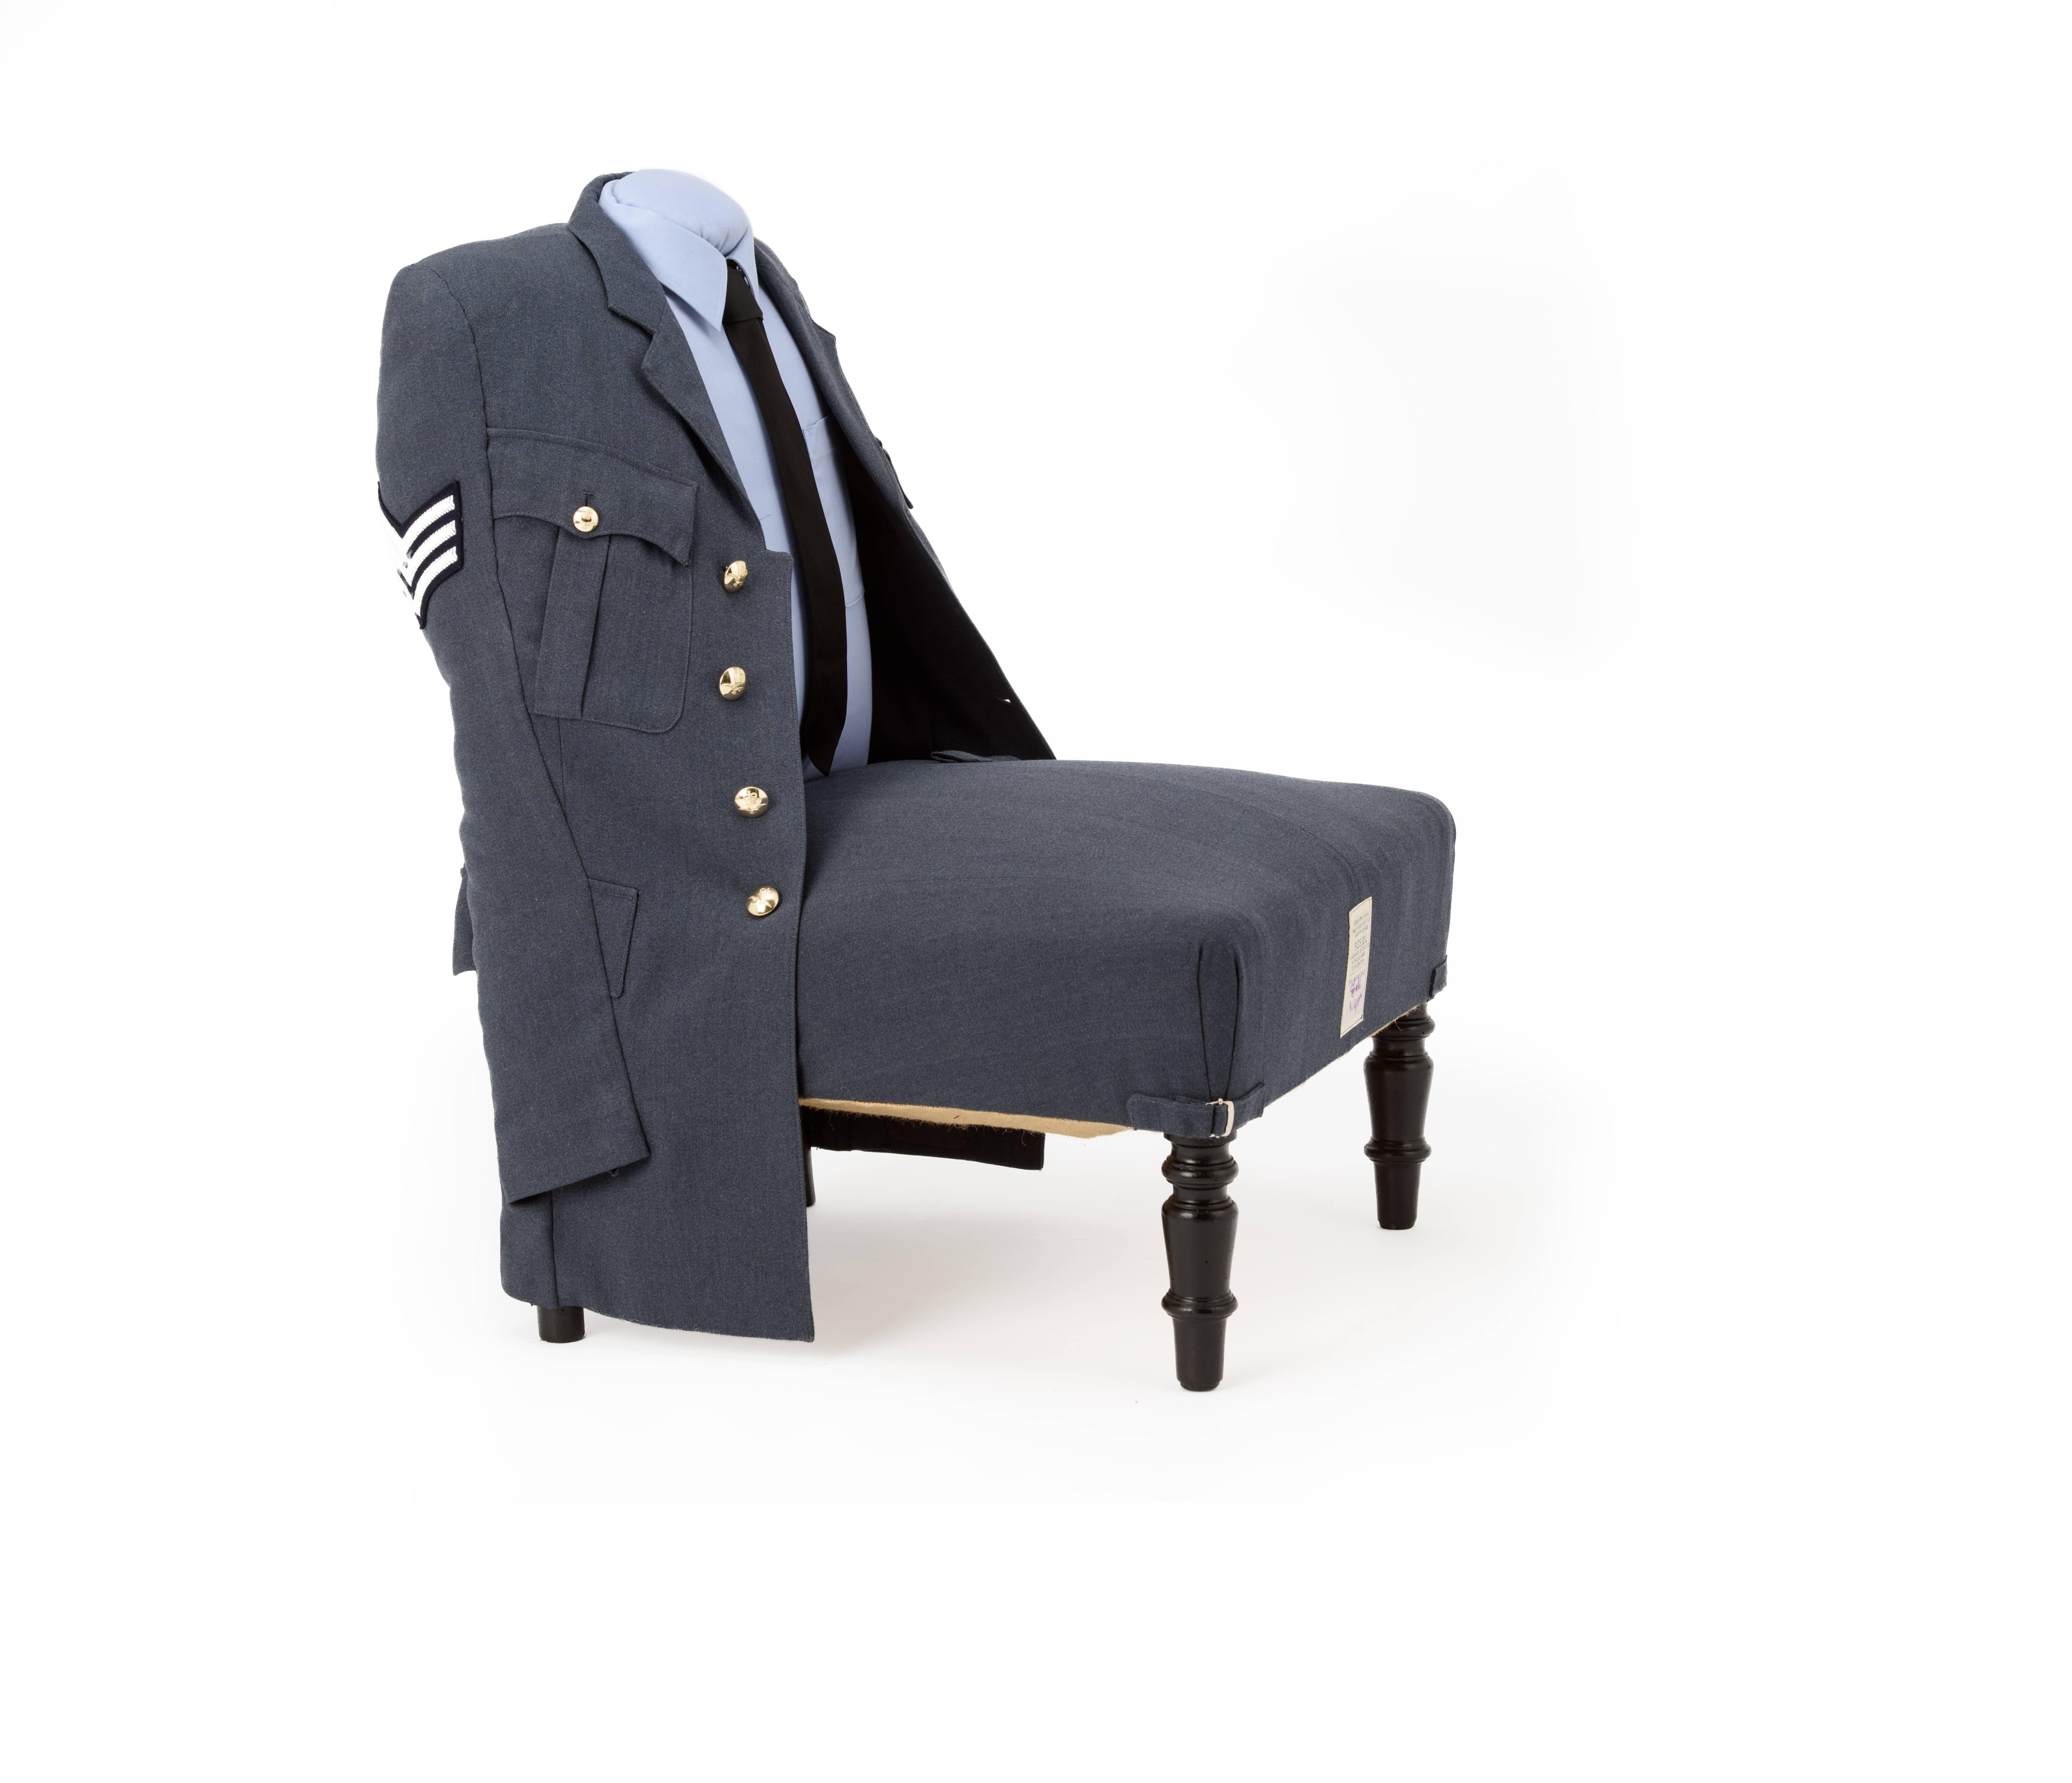 Delightful little late Victorian mahogany hall chair with turned blackened enamel hand-painted legs. Taking an original and complete RAF uniform once worn by 'Gunner Logan' acquired from the daughter of previous proud wearer we have created this